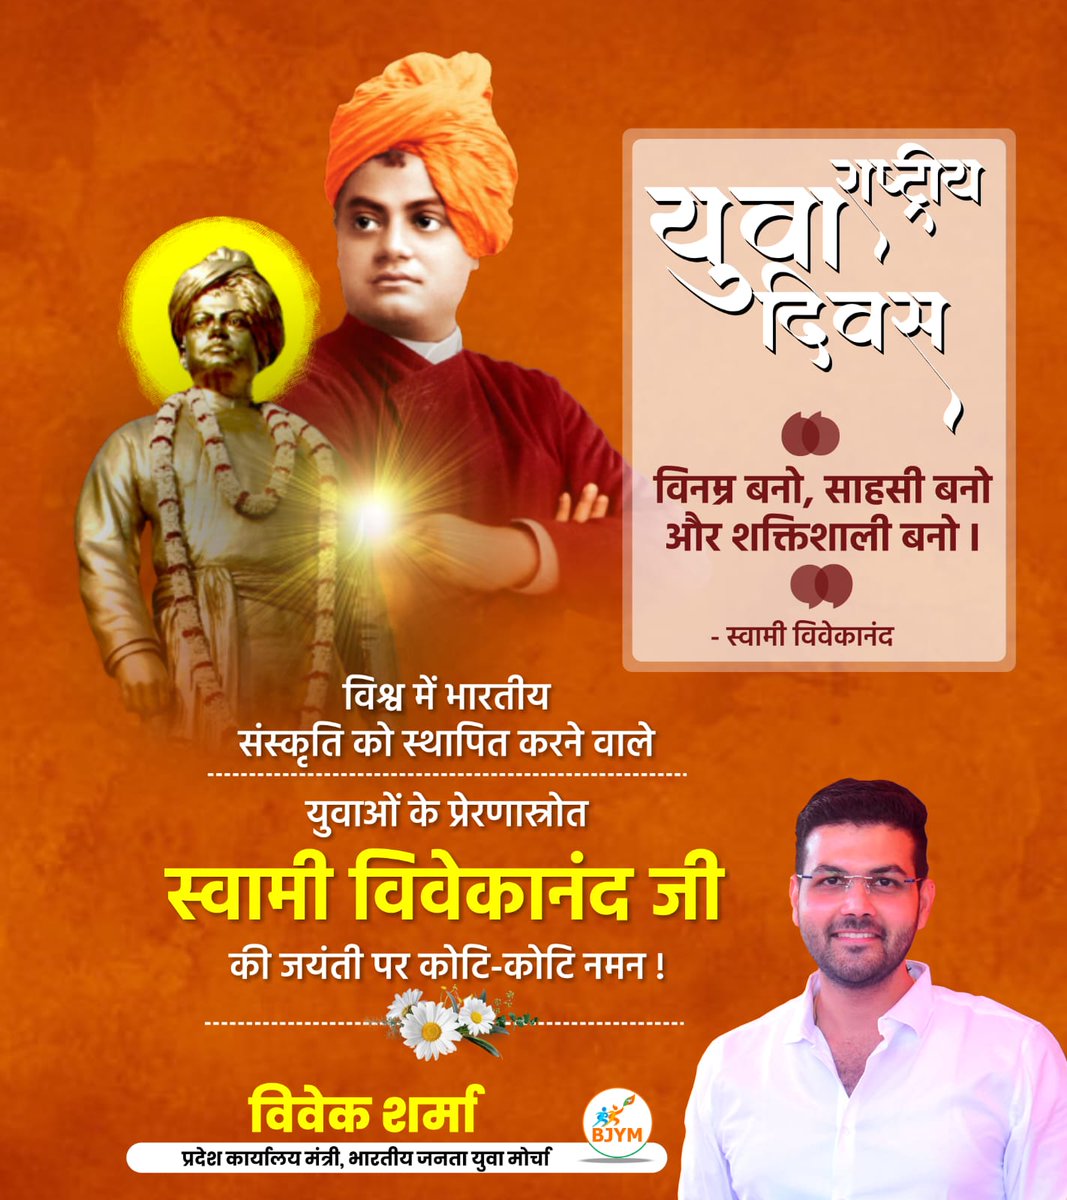 On this #NationalYouthDay, let’s remember n reinforce the teachings of #SwamiVivekananda & resolve to ensure goal of empowering our #YoungIndians for a #NewIndia 🇮🇳

#NewIndia4YoungIndia